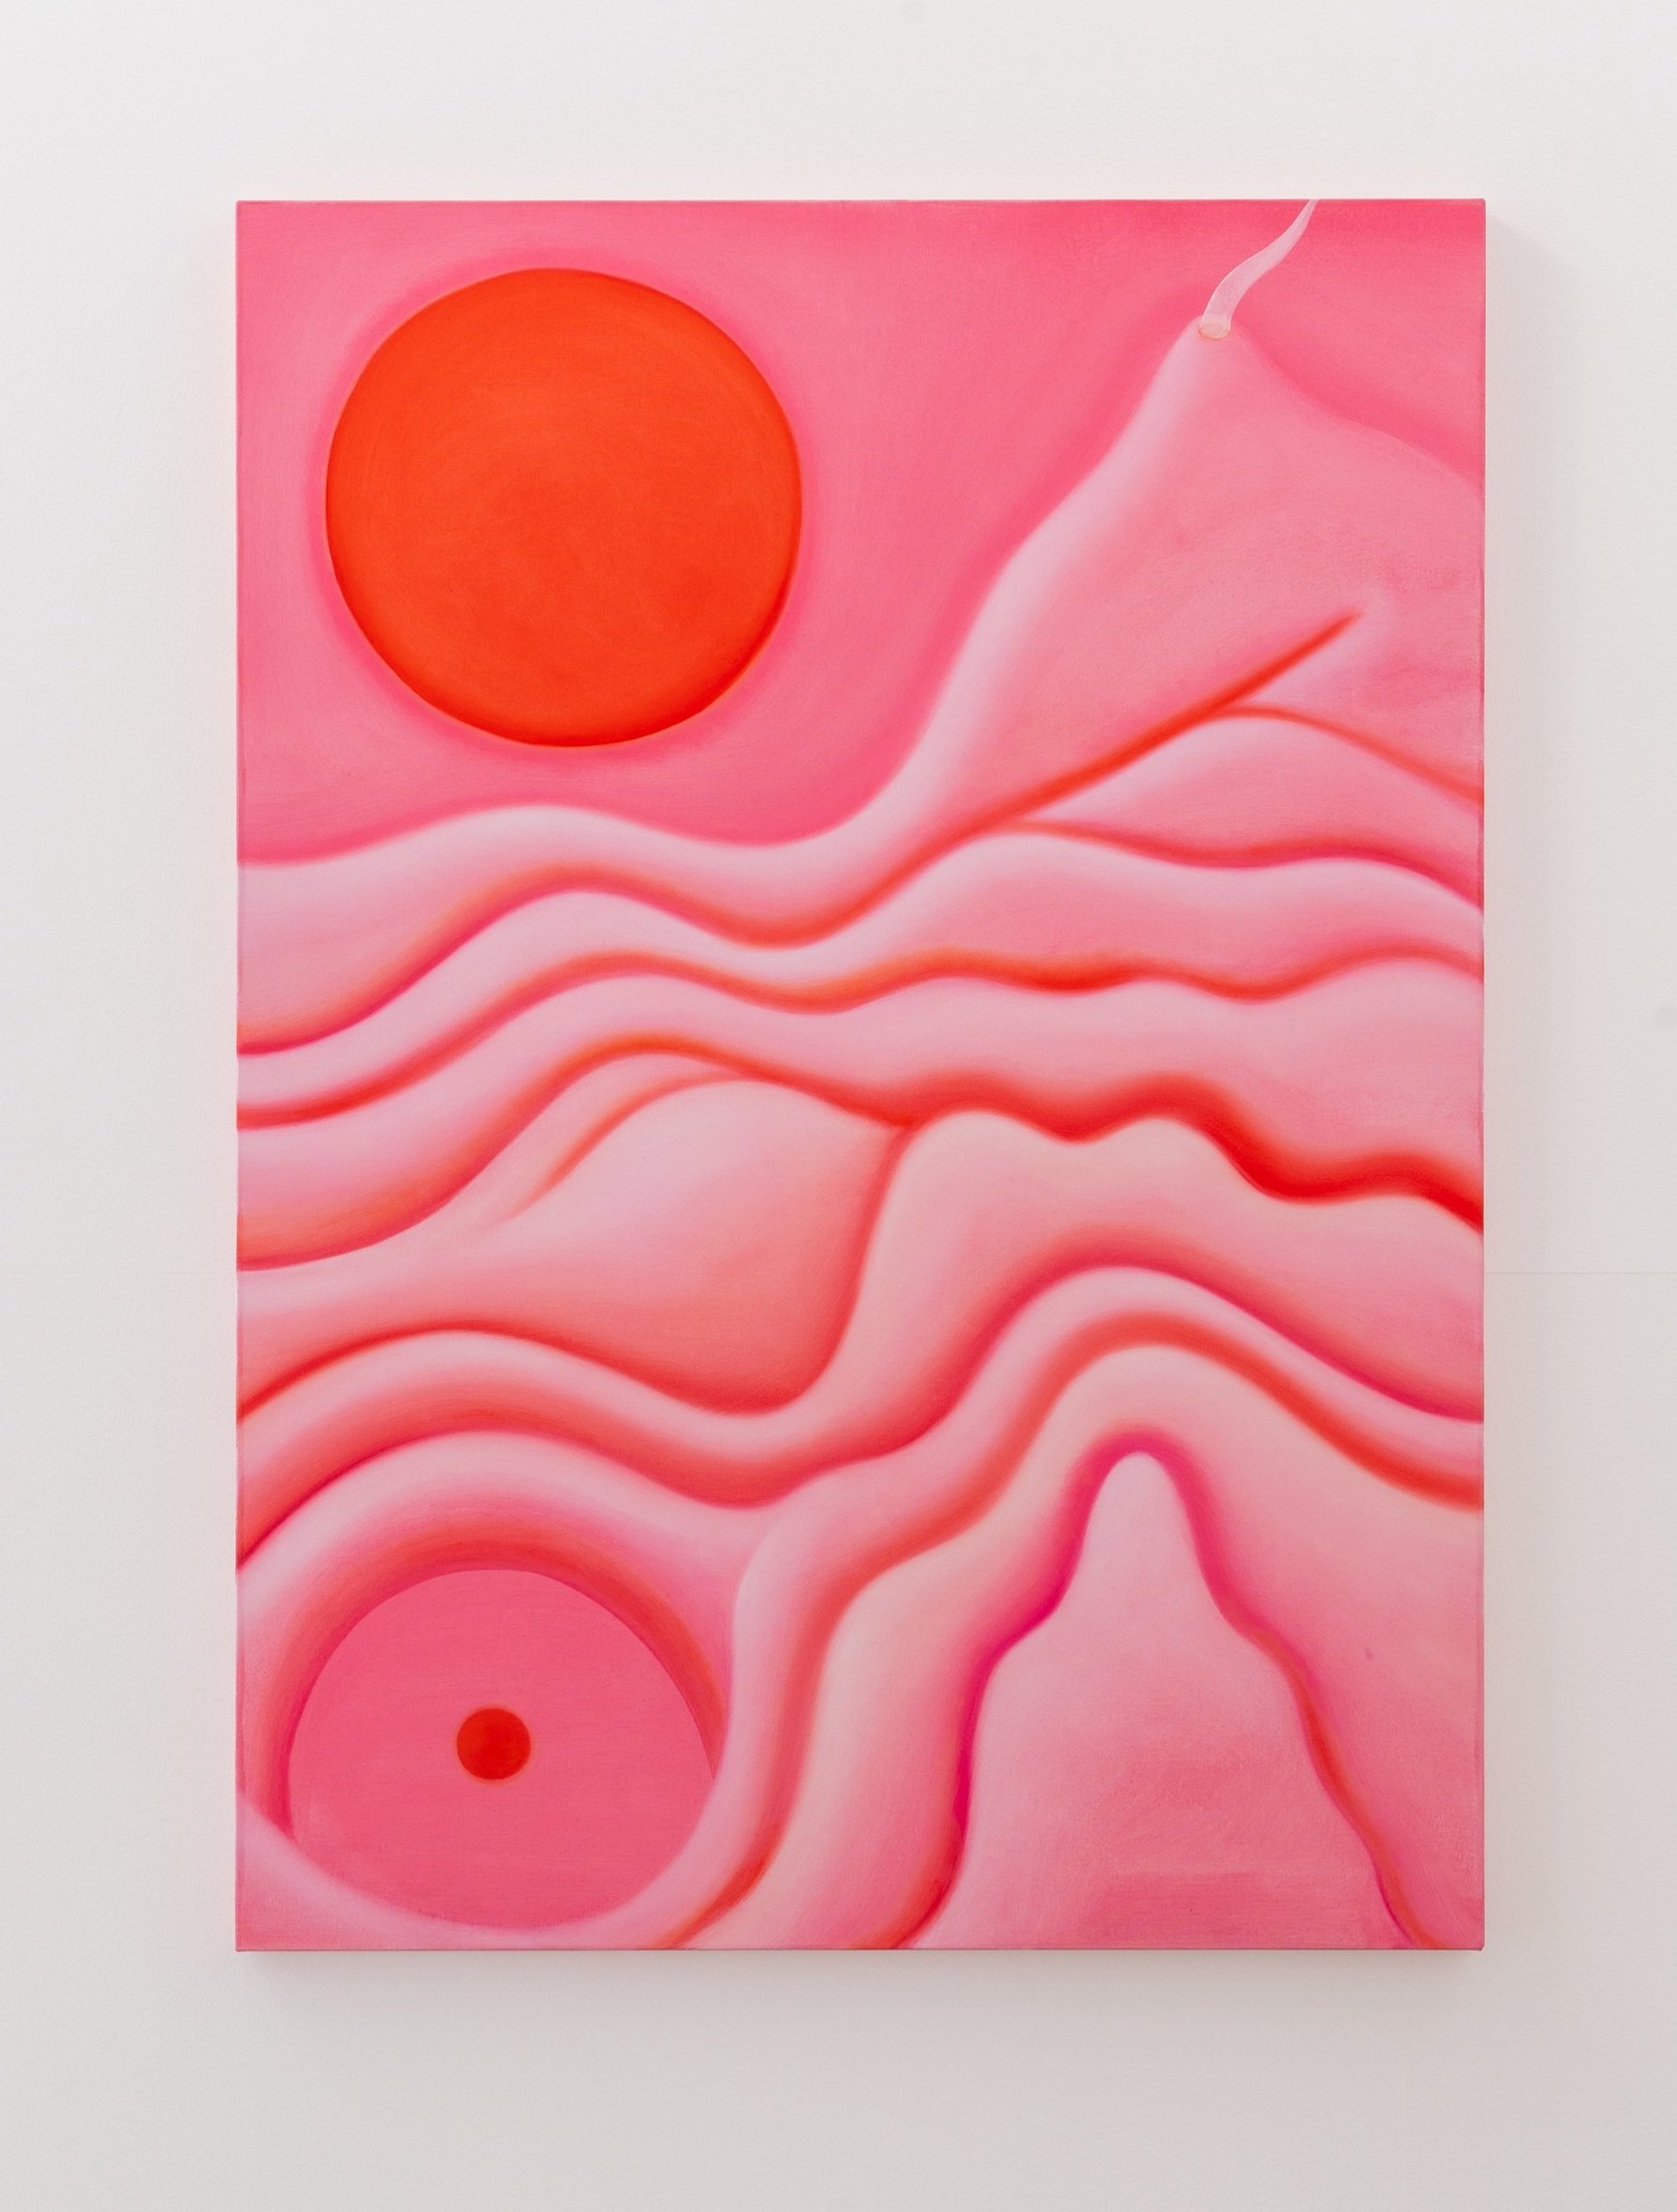  Camilla Engström,  Pink Dreams , 2022. Oil on canvas. Dimensions: 140h x 100w cm. Image courtesy Carl Kostyál, London and Stockholm 